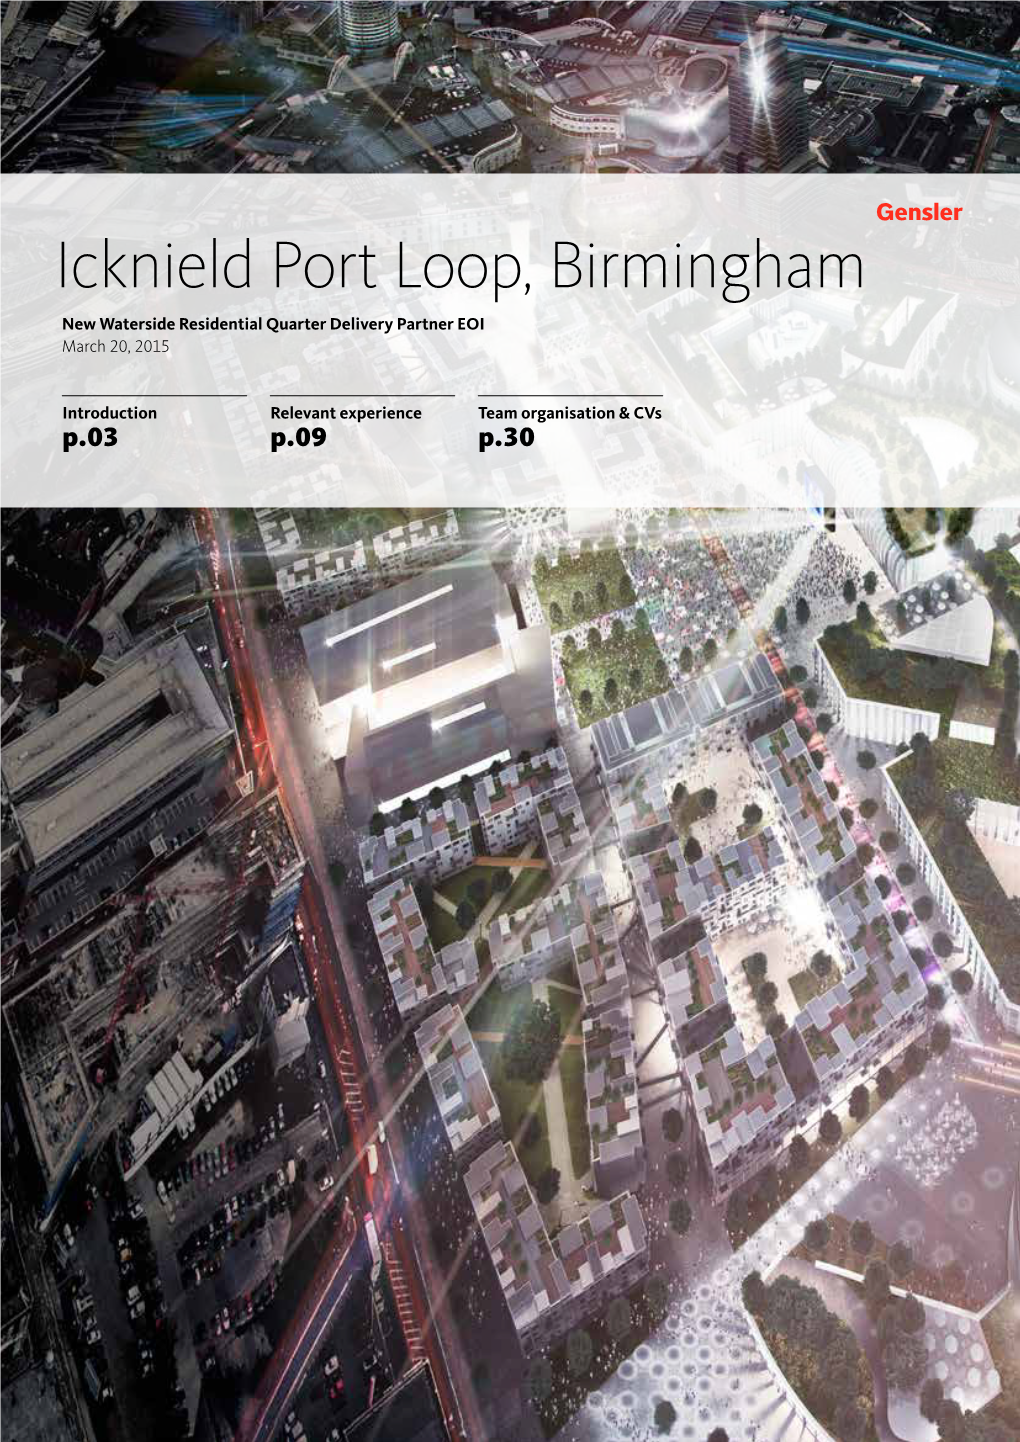 Icknield Port Loop, Birmingham New Waterside Residential Quarter Delivery Partner EOI March 20, 2015